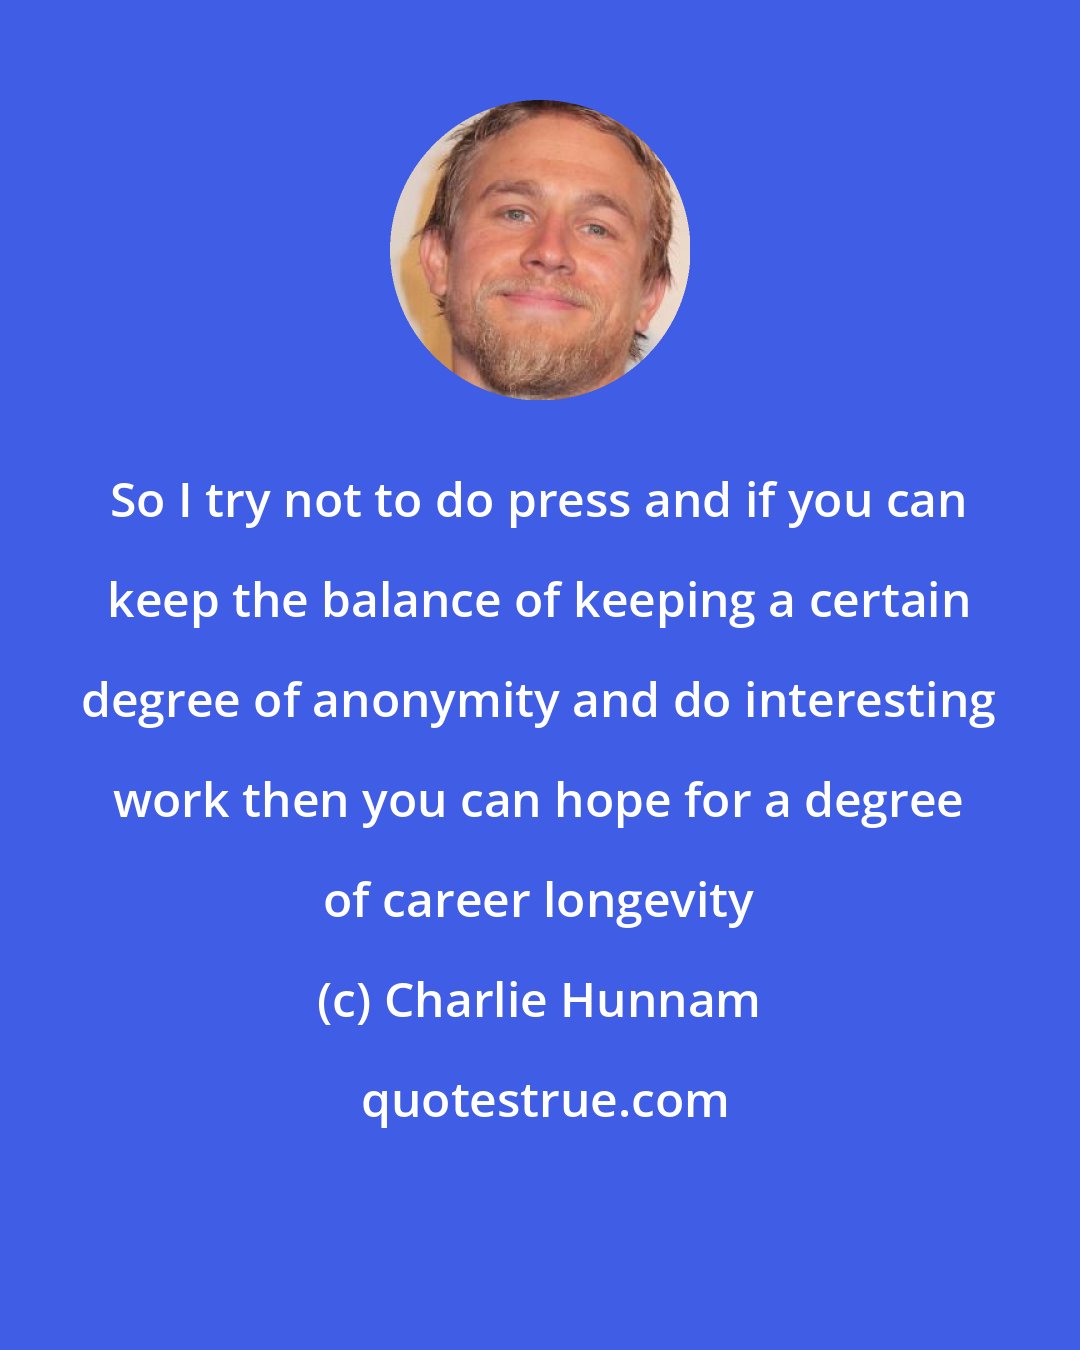 Charlie Hunnam: So I try not to do press and if you can keep the balance of keeping a certain degree of anonymity and do interesting work then you can hope for a degree of career longevity